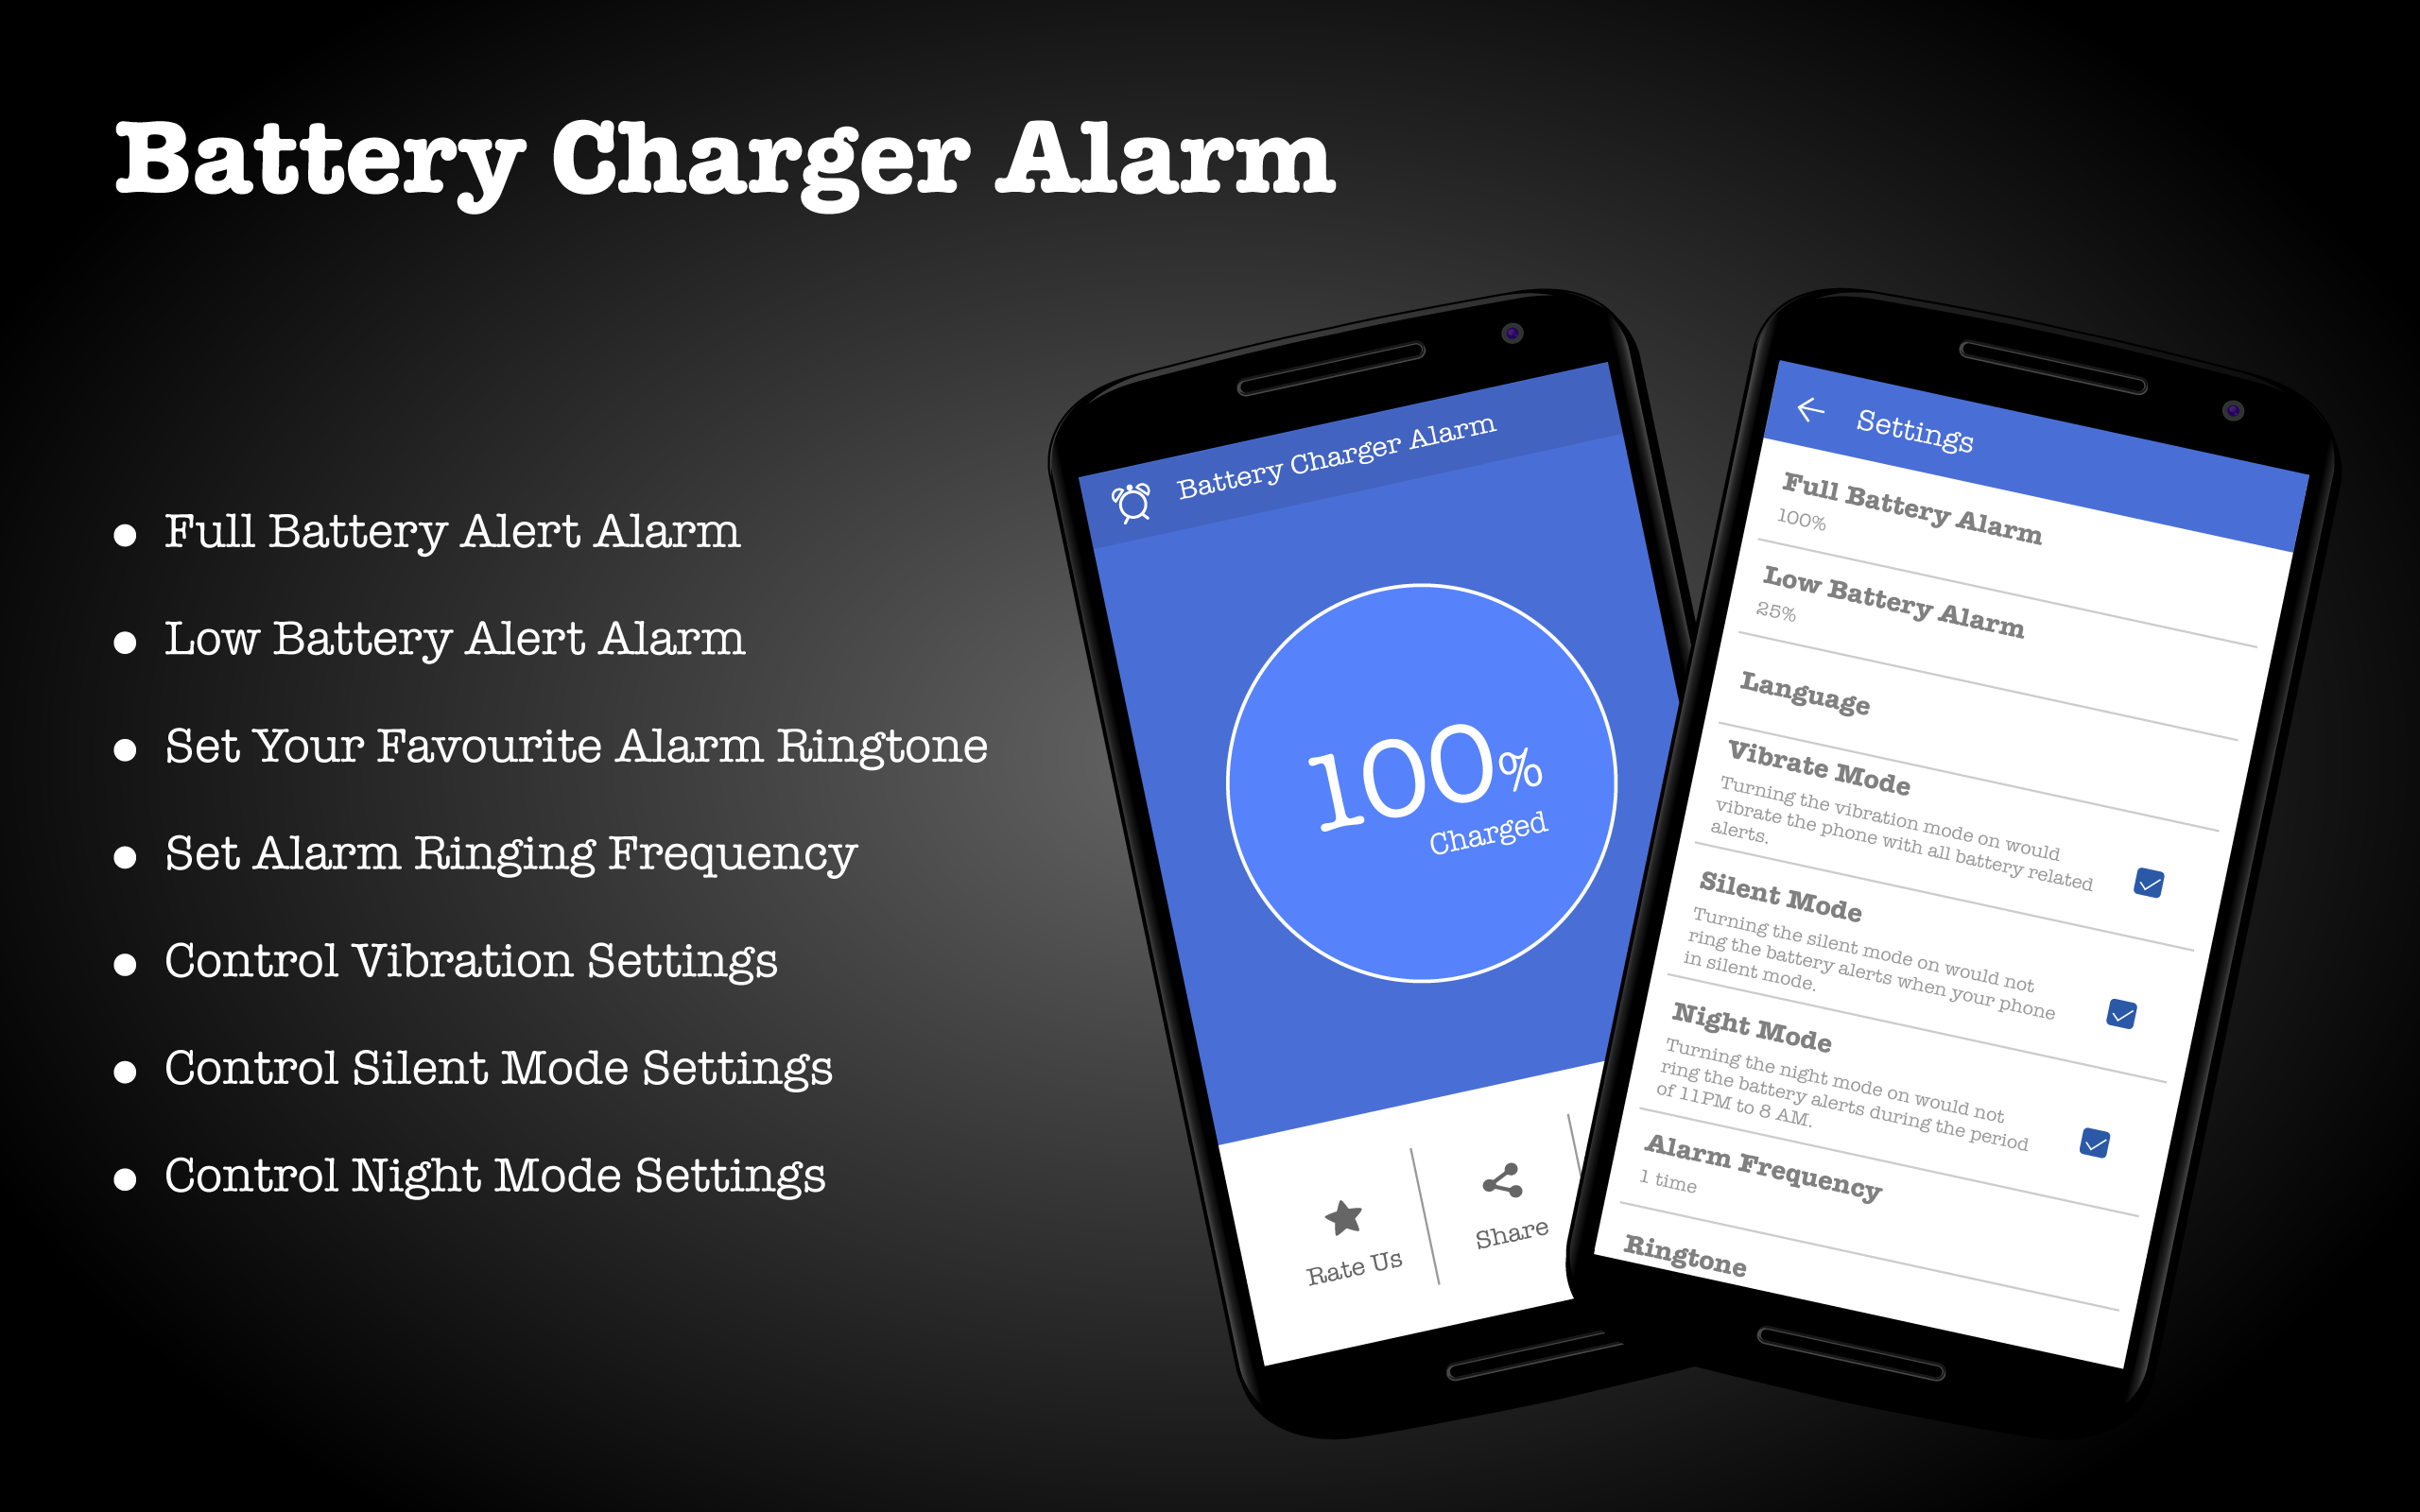 Battery Charger Alarm APK 2.7 for Android – Download Battery Charger Alarm  APK Latest Version from APKFab.com